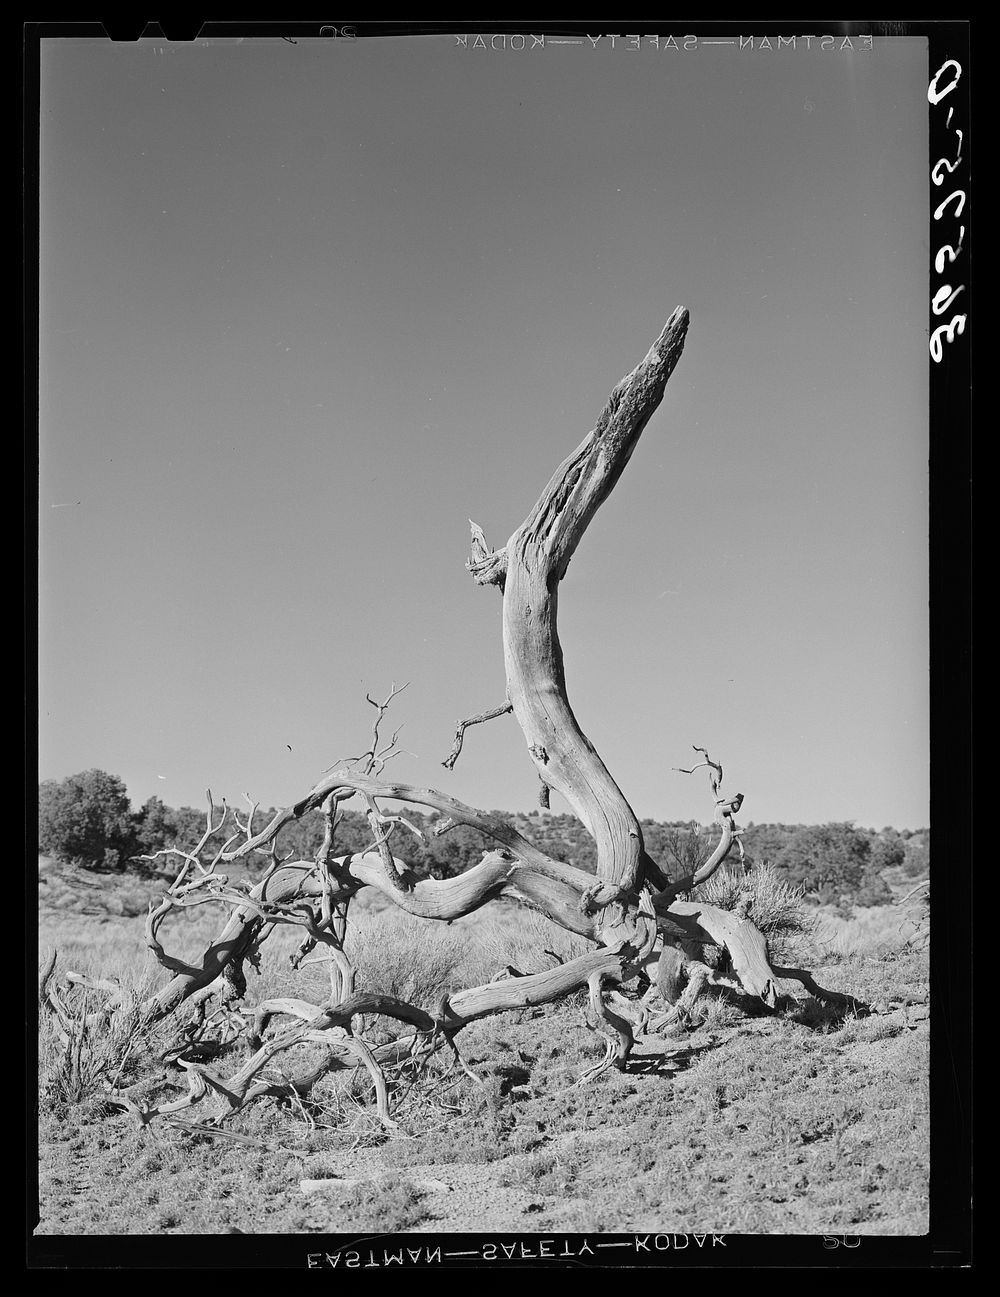 Twisted tree. Pie Town, New Mexico by Russell Lee